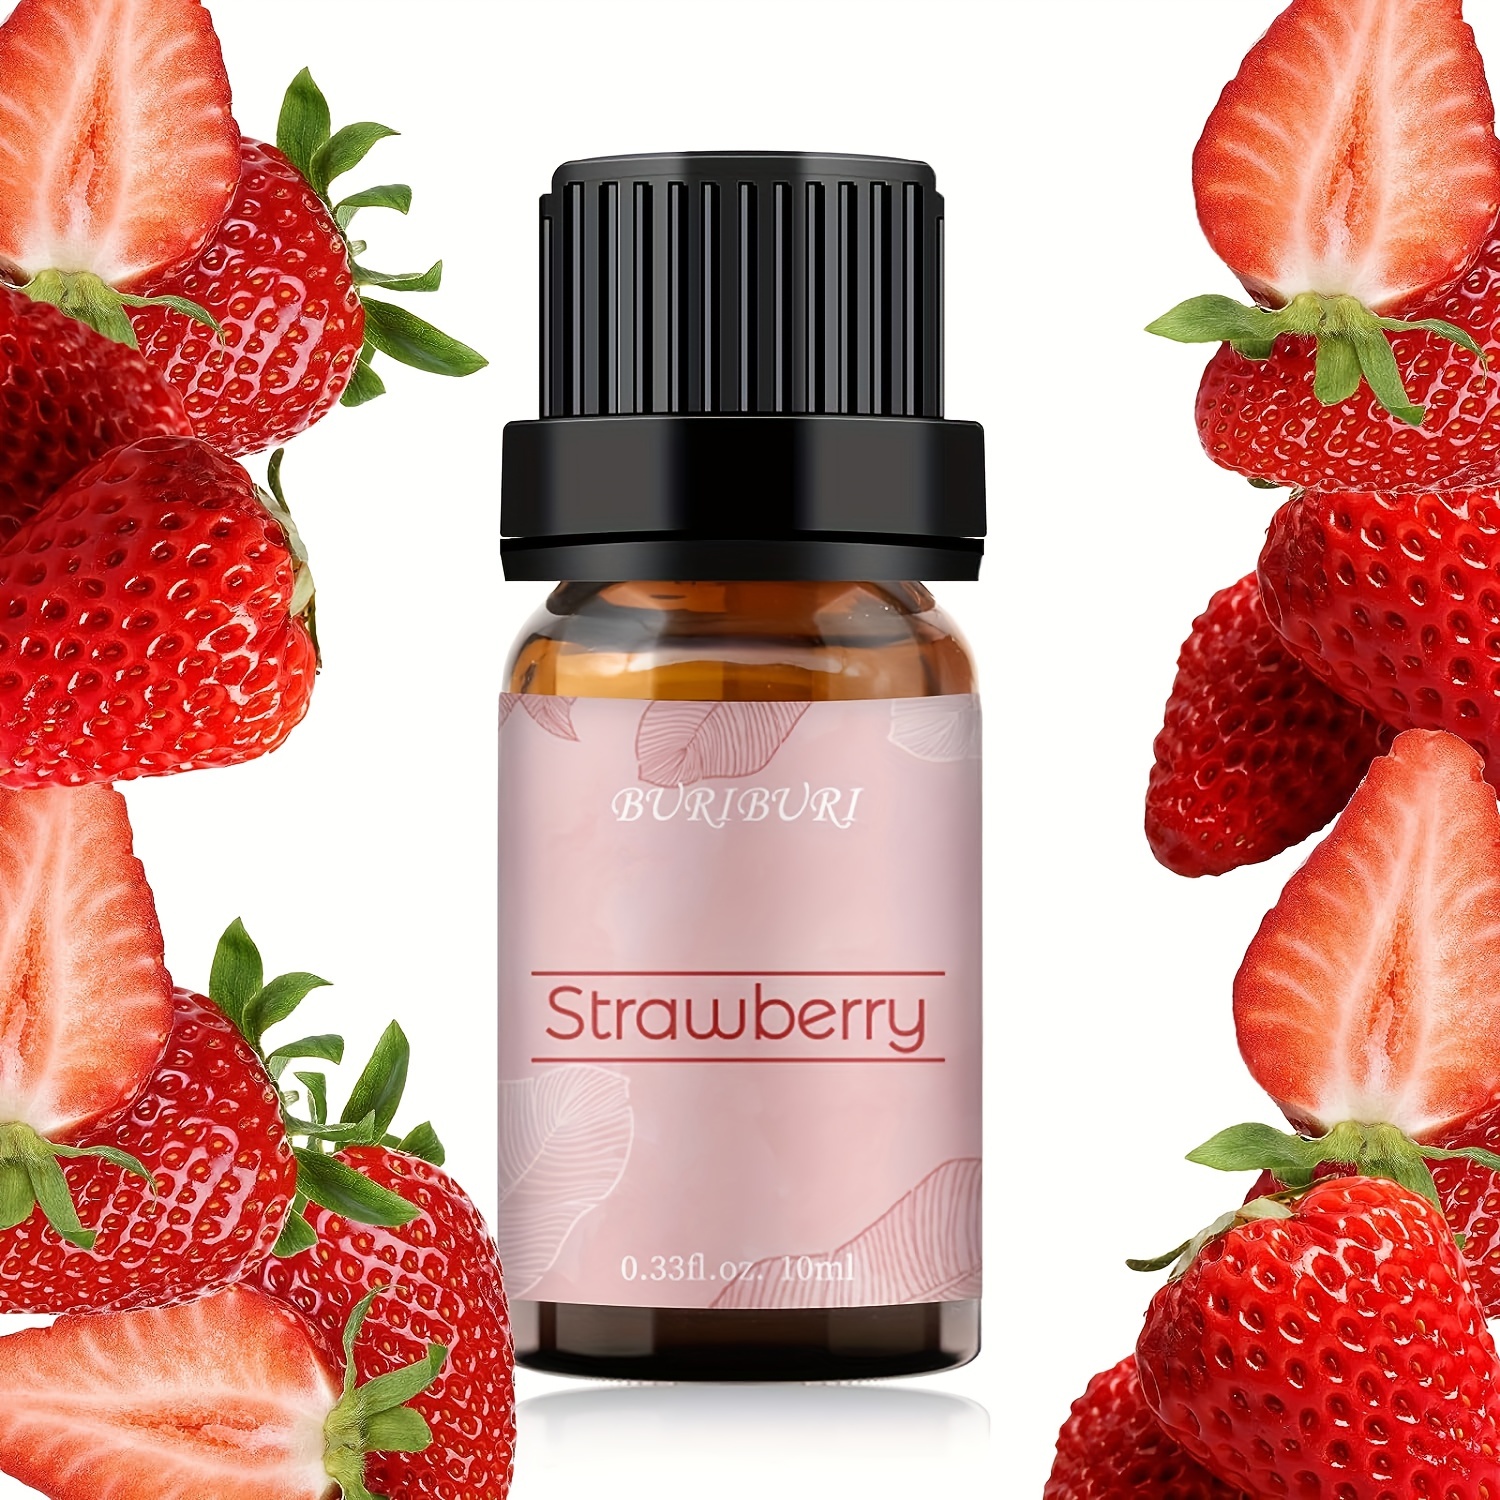 EUQEE 2.02 Fl oz Strawberry Fragrance Oil, Premium Strawberry Essential Oil  with Glass Dropper for Diffuser, DIY Soap, Candle Making - 60ML